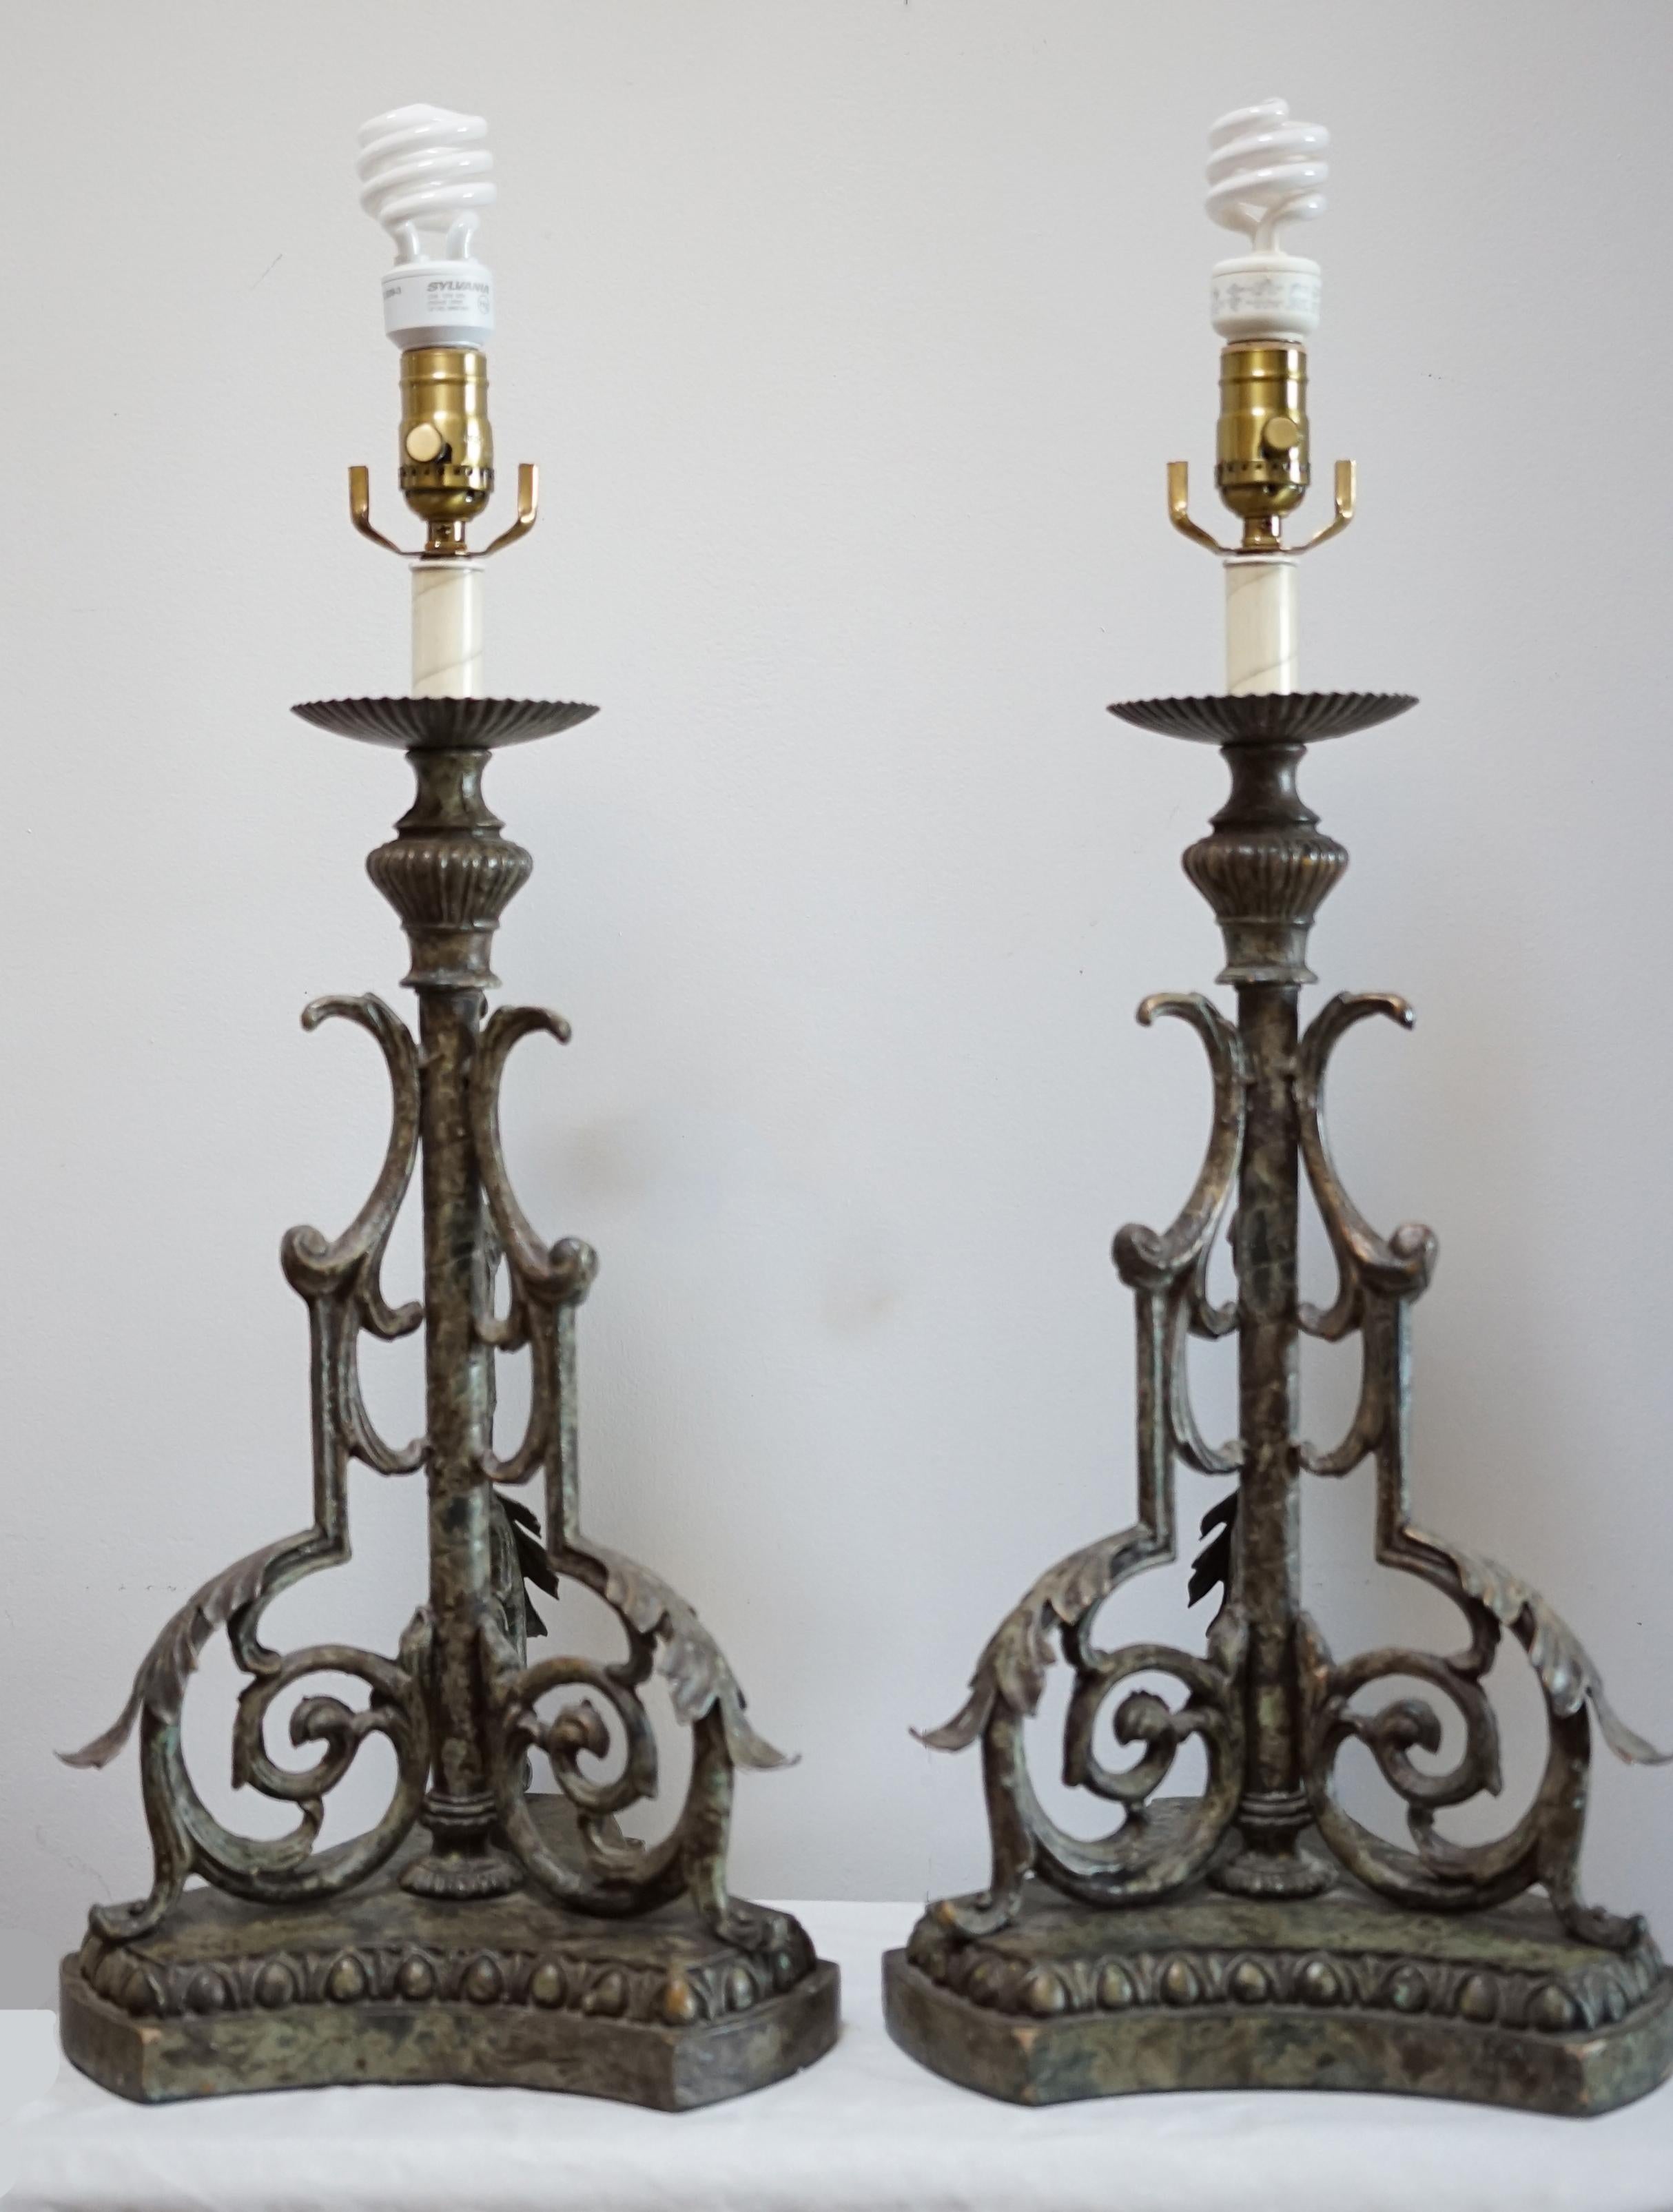 
This beautiful pair of hand wrought iron converted lamps once lit the way as pricket candleholders, and it surely took two hands to hold one. They are heavy, handcrafted beautifully, formed lamp conversions with a verdigris finish and a patina that